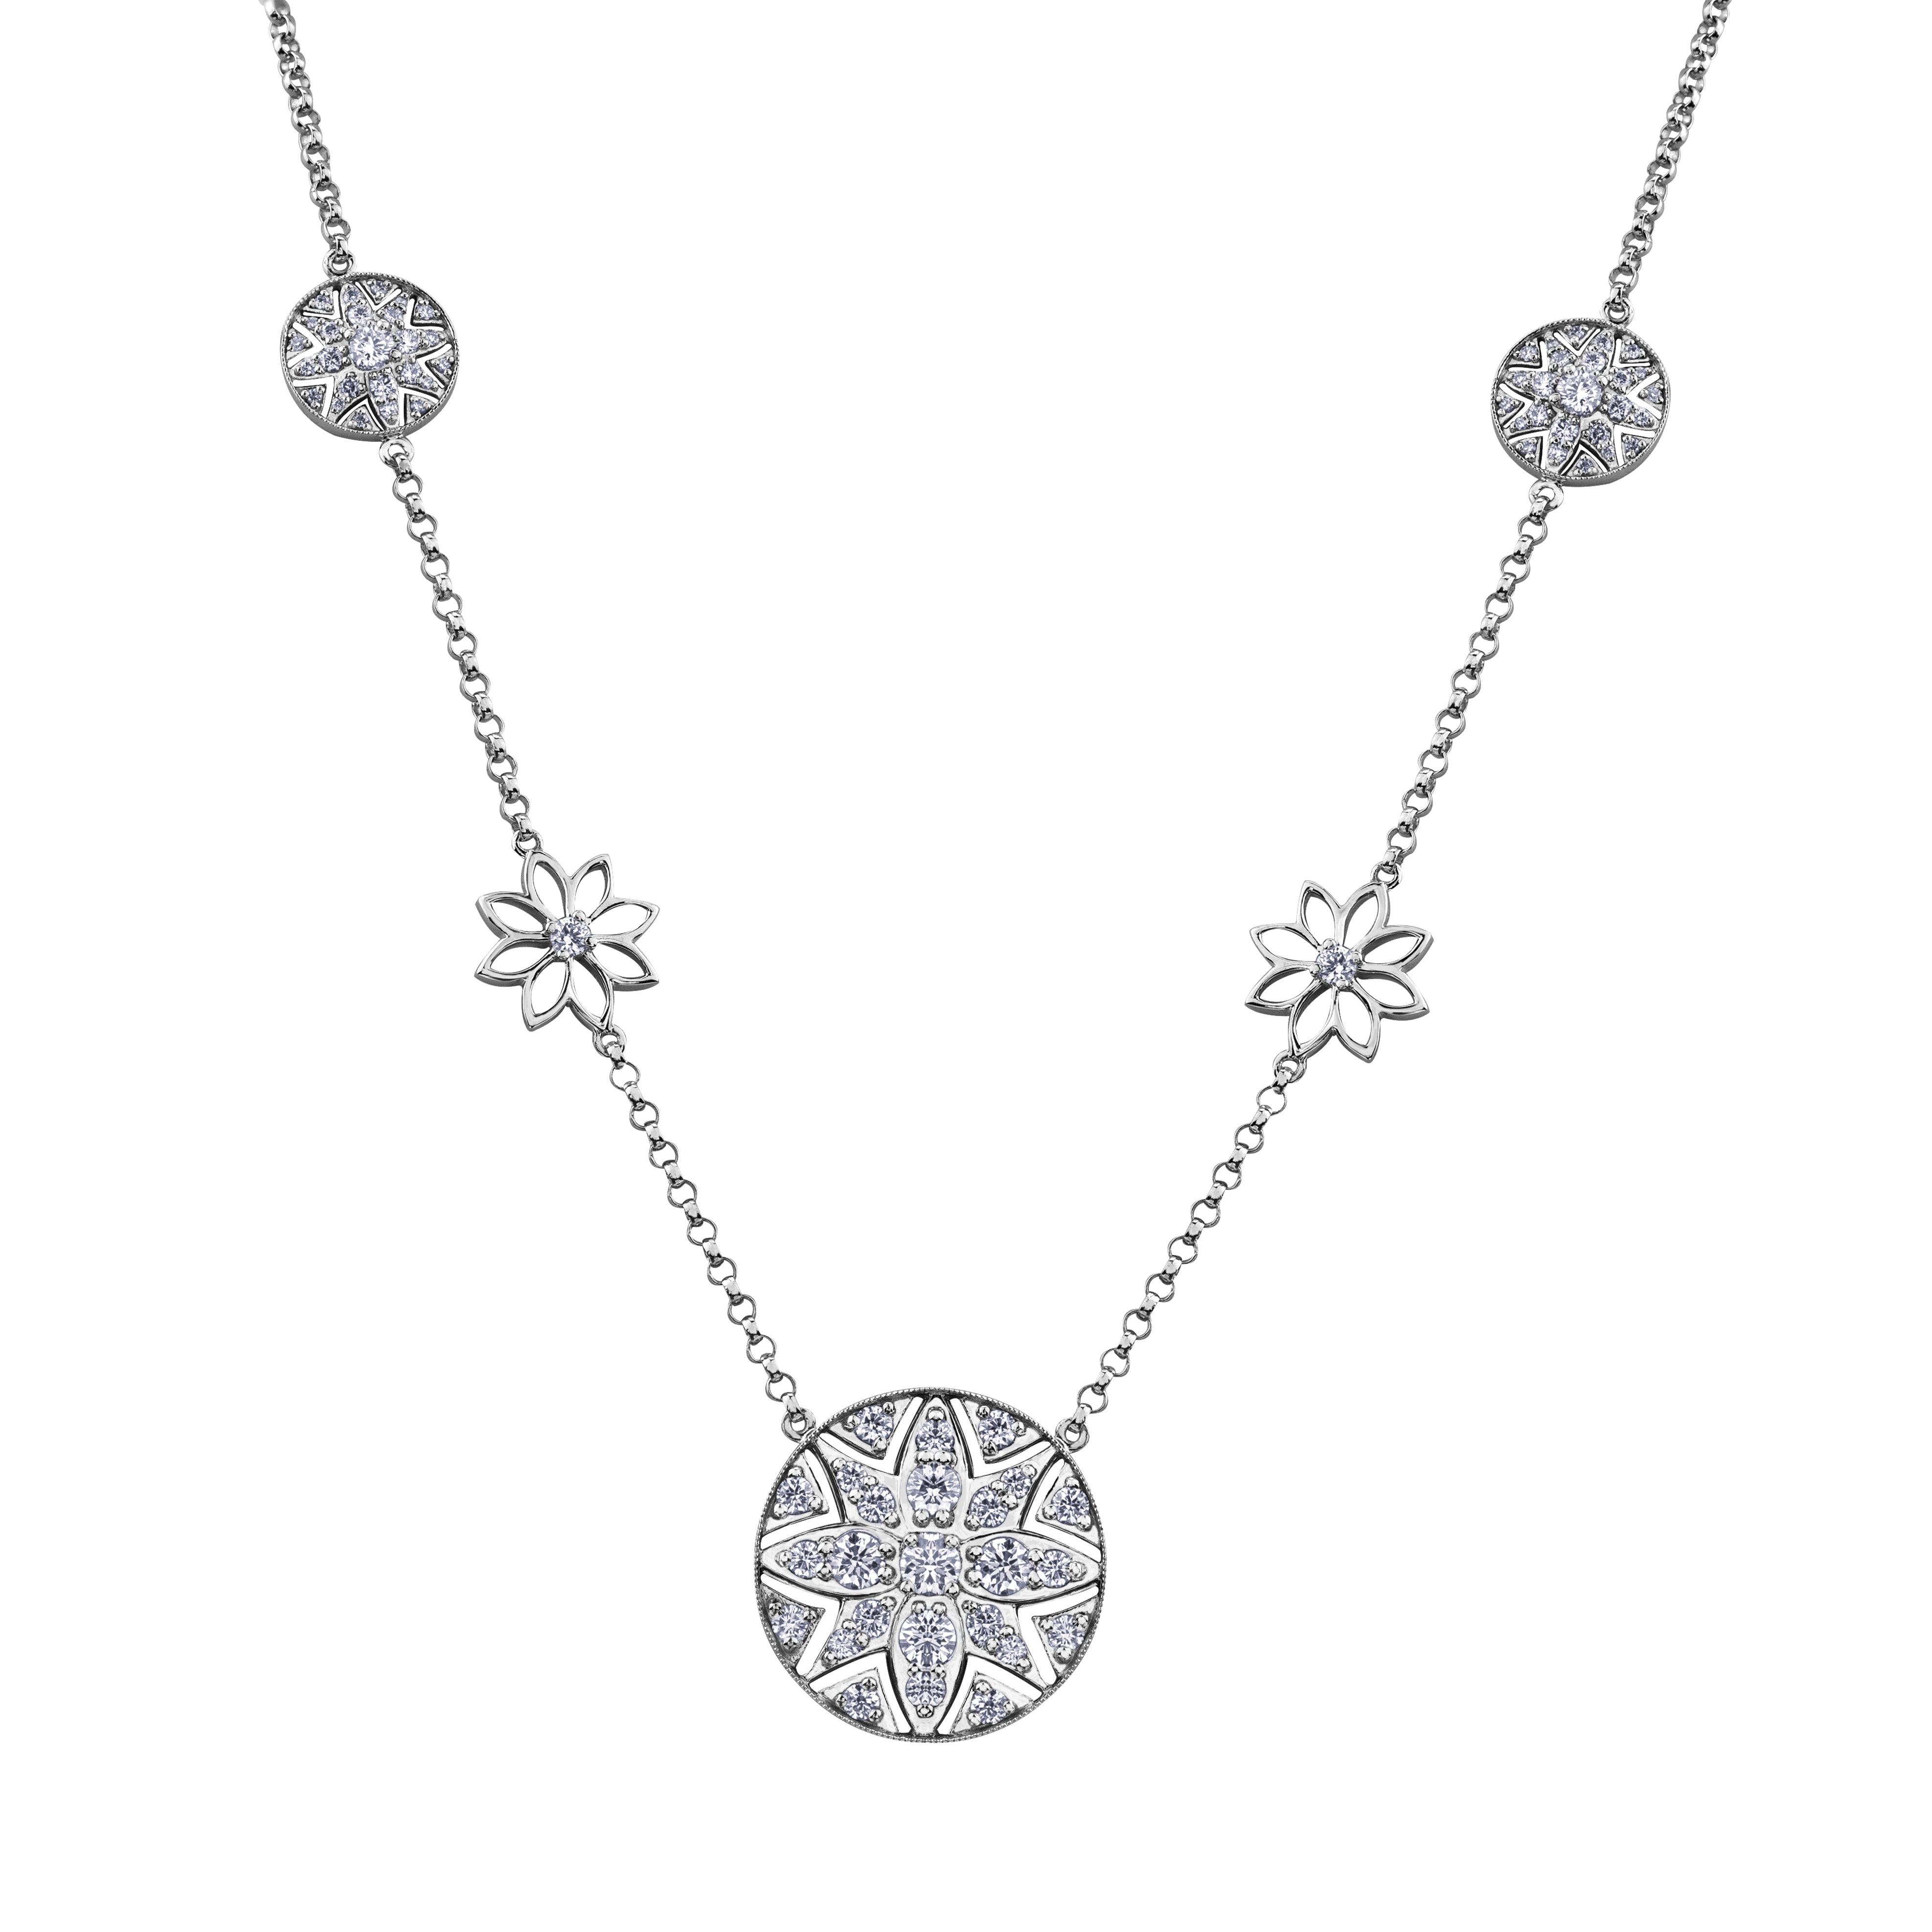 Crafted in 14KT Certified Canadian Gold, this necklace features a filigree water lily pendant set with Canadian diamonds.